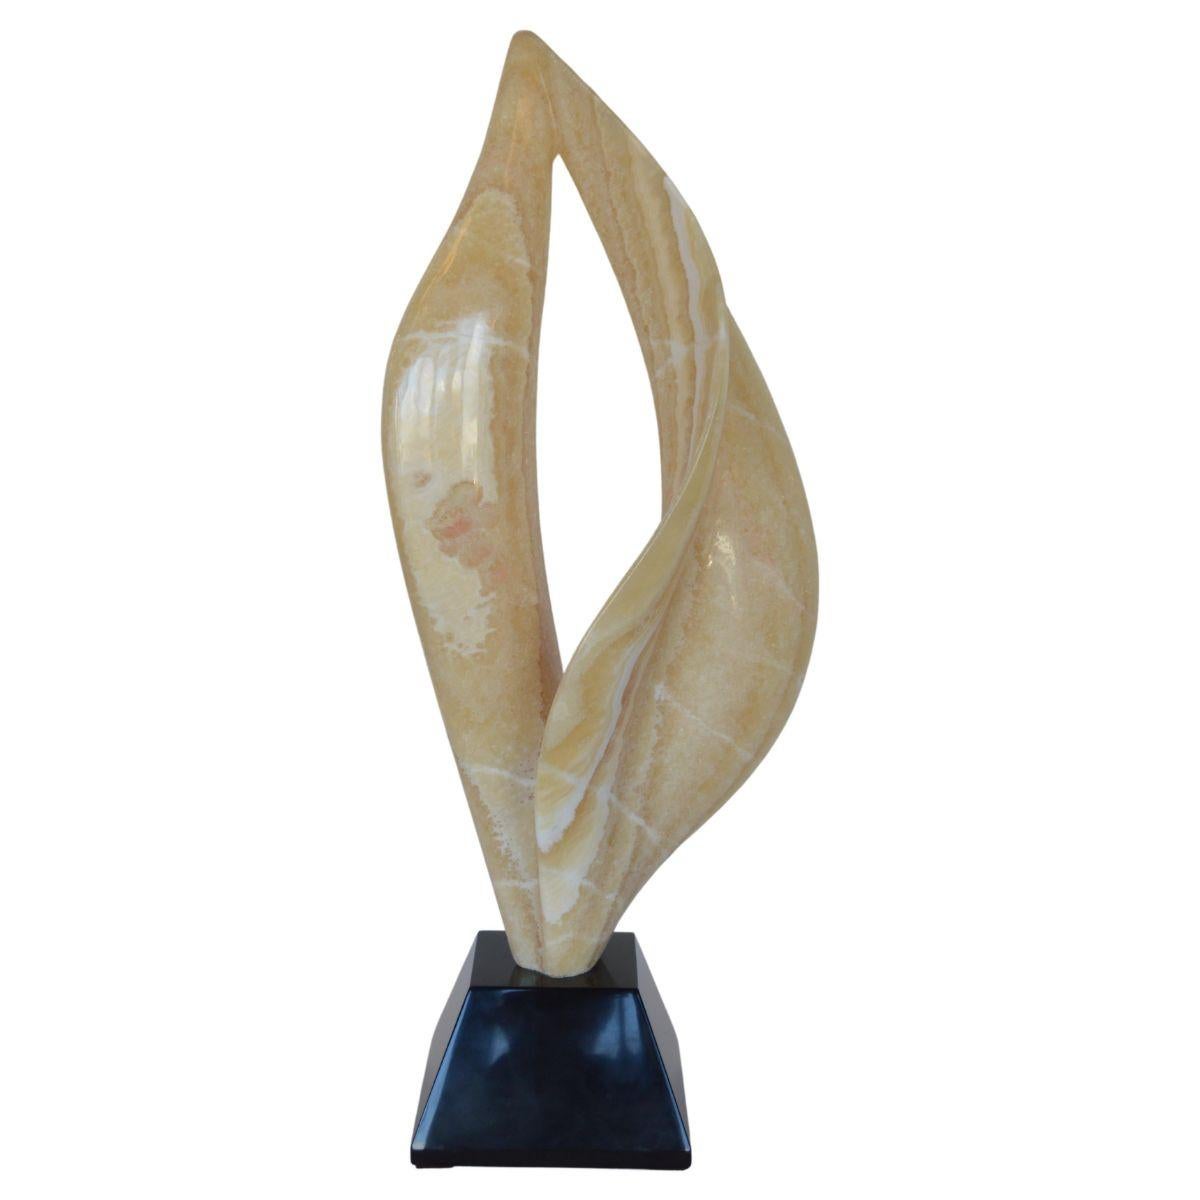 Smooth flame sculpture carved from onyx. 

Dimensions:
31.5